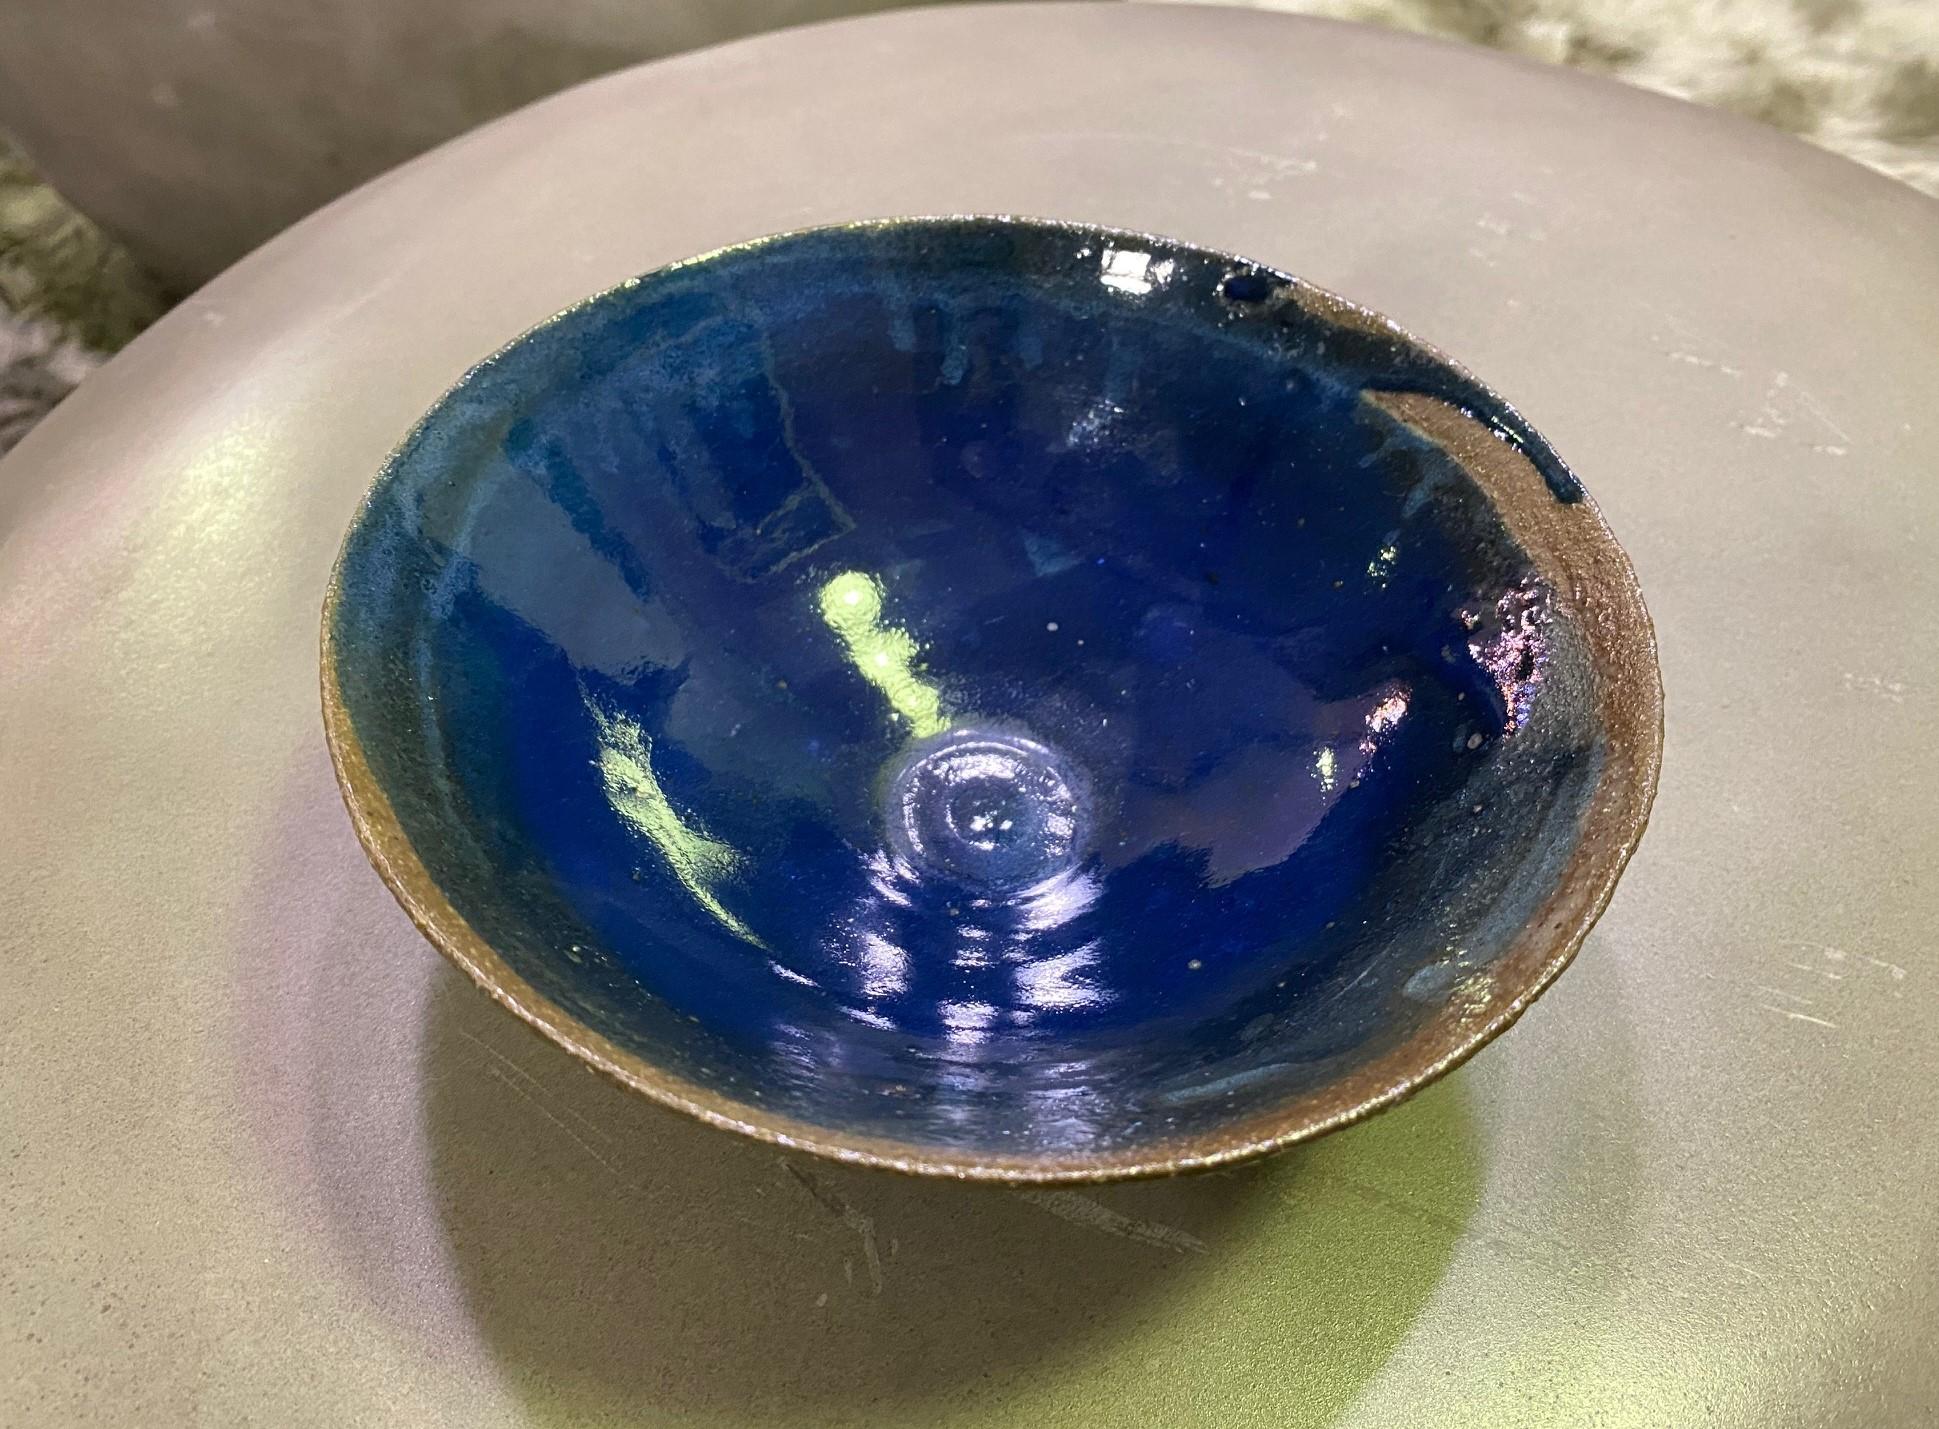 Wonderful work. The deep, rich blue glaze is spectacular. Very well done by an artist at the top of his or her craft.

Signed on the base.

We can't place the maker. It did come from a collection of very well known midcentury potters and was